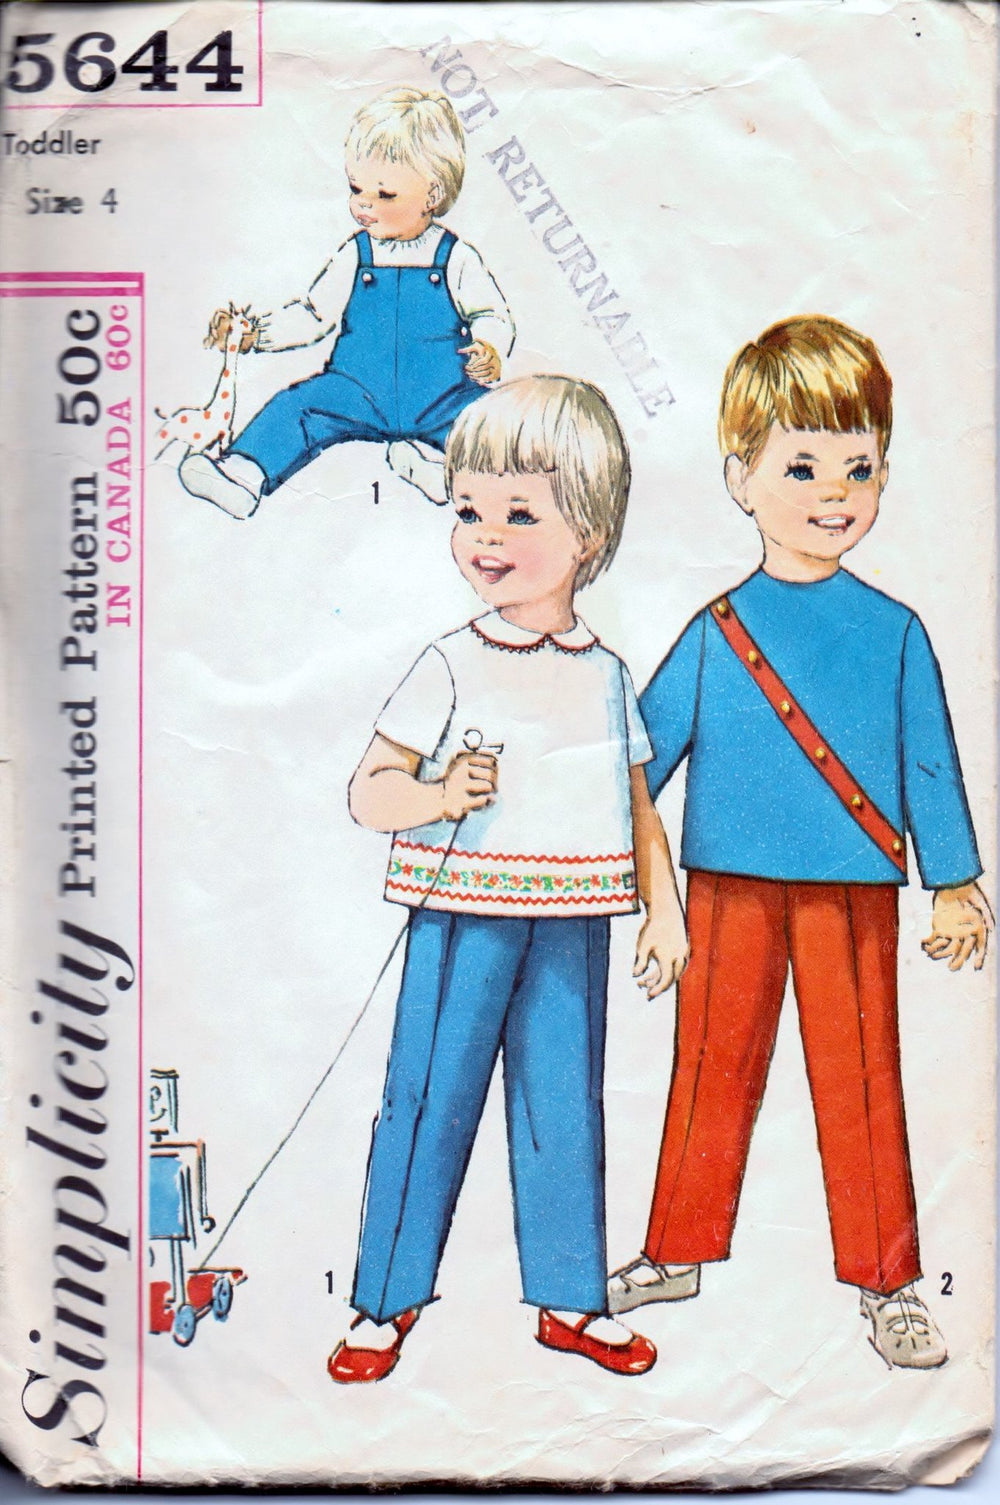 Simplicity 5644 Toddlers' Overalls and Top Vintage 1960's Sewing Pattern - VintageStitching - Vintage Sewing Patterns